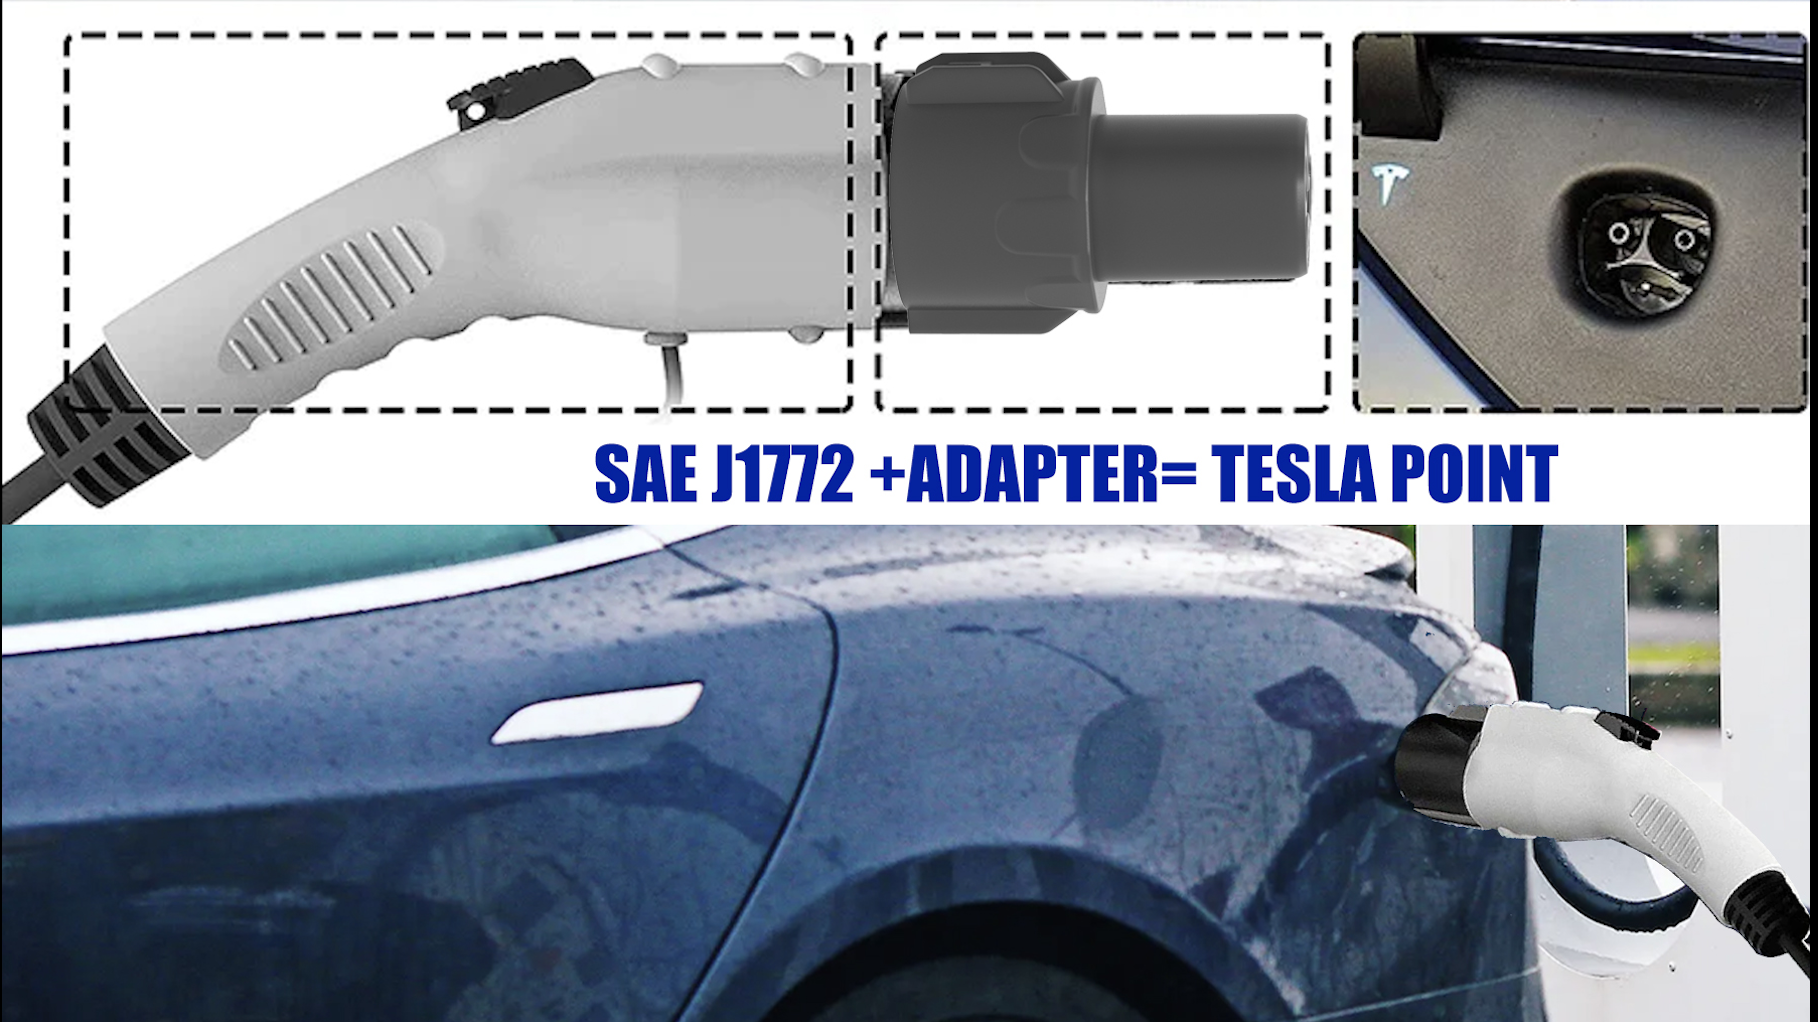 Wholesale Ev Charger J1772 Adapter to Tesla Factory and Manufacturer